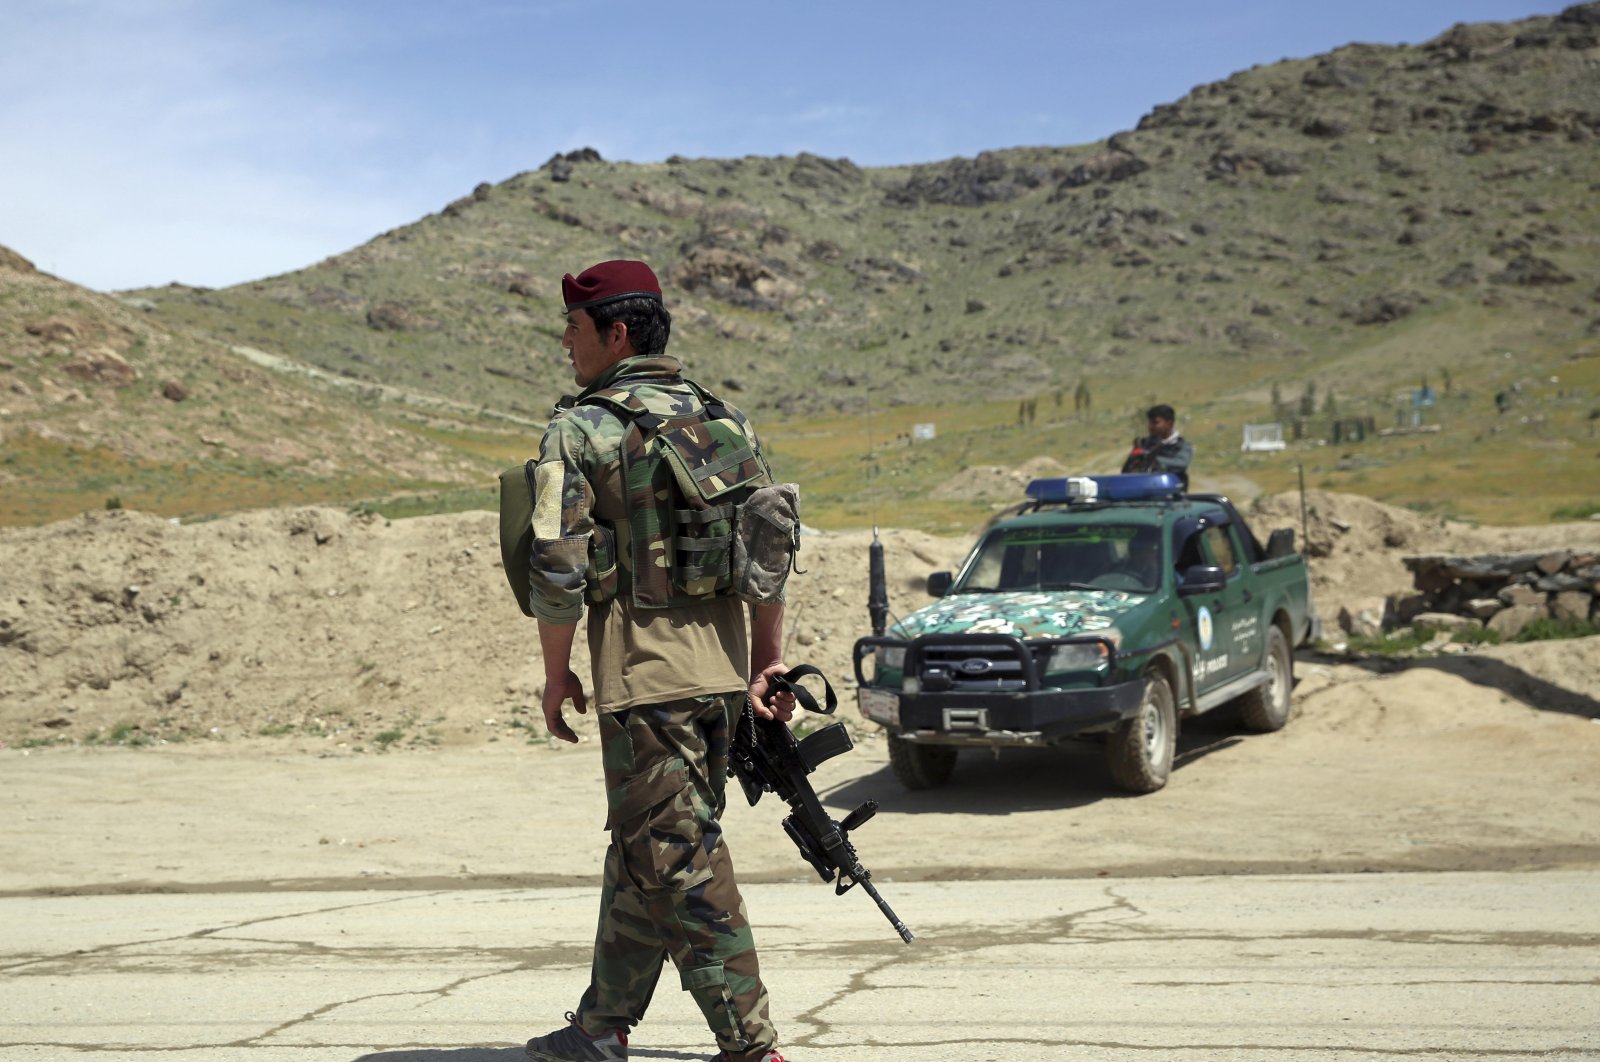 Afghan security personnel stand guard at the site of a suicide bomber attack on the southern outskirts of Kabul, Afghanistan, Wednesday, April 29, 2020. (AP Photo)